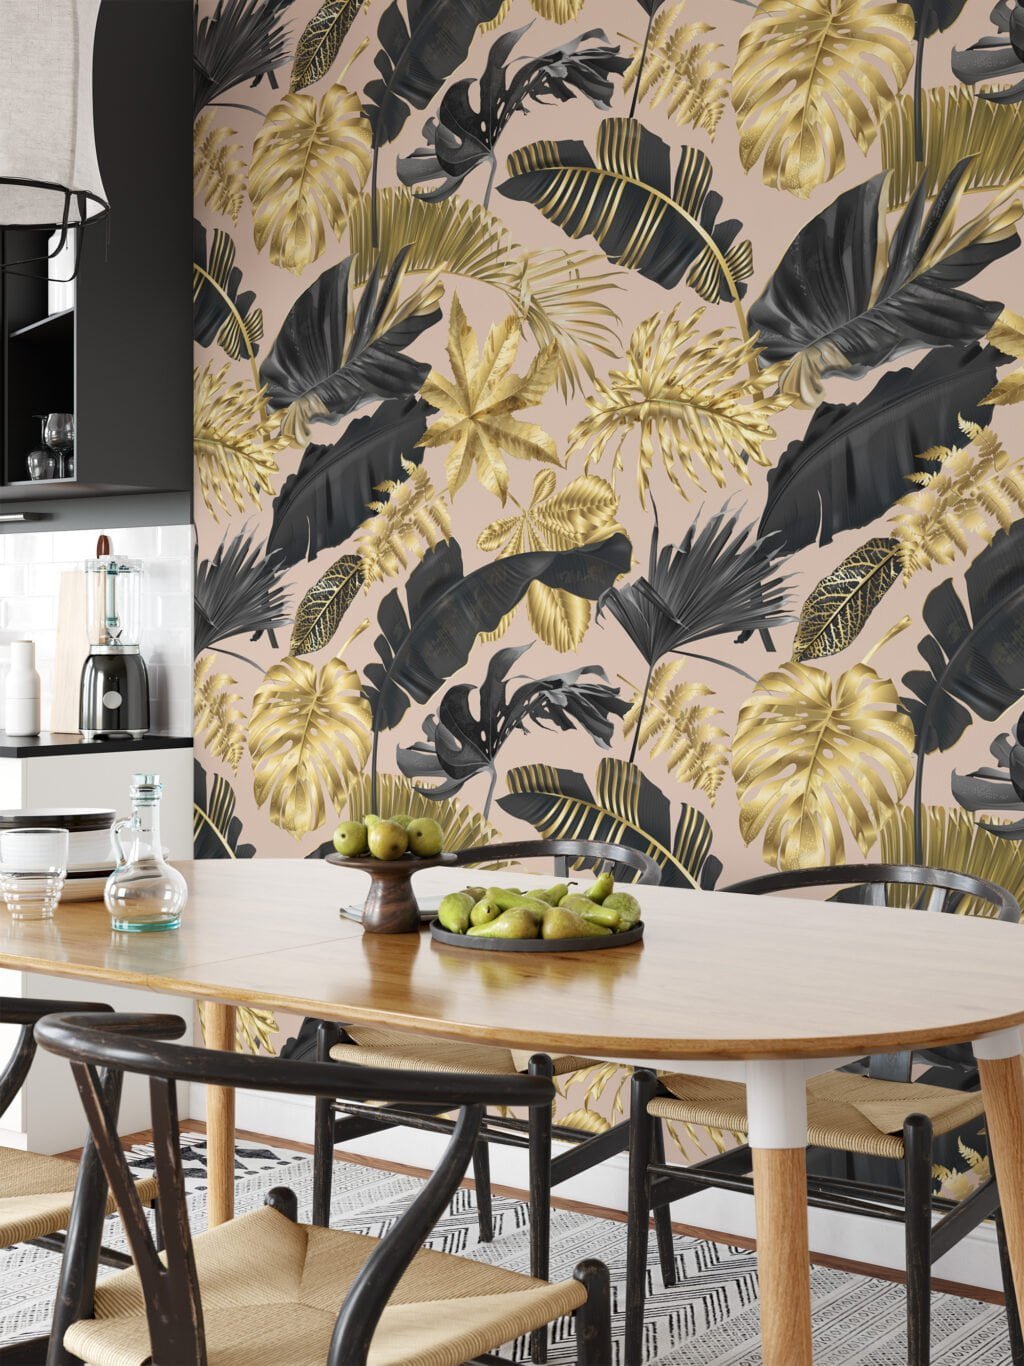 Luxurious Gold and Black Tropical Leaves on Peach Pink Background - Self-Adhesive Peel and Stick Modern Wallpaper for a Touch of Elegance